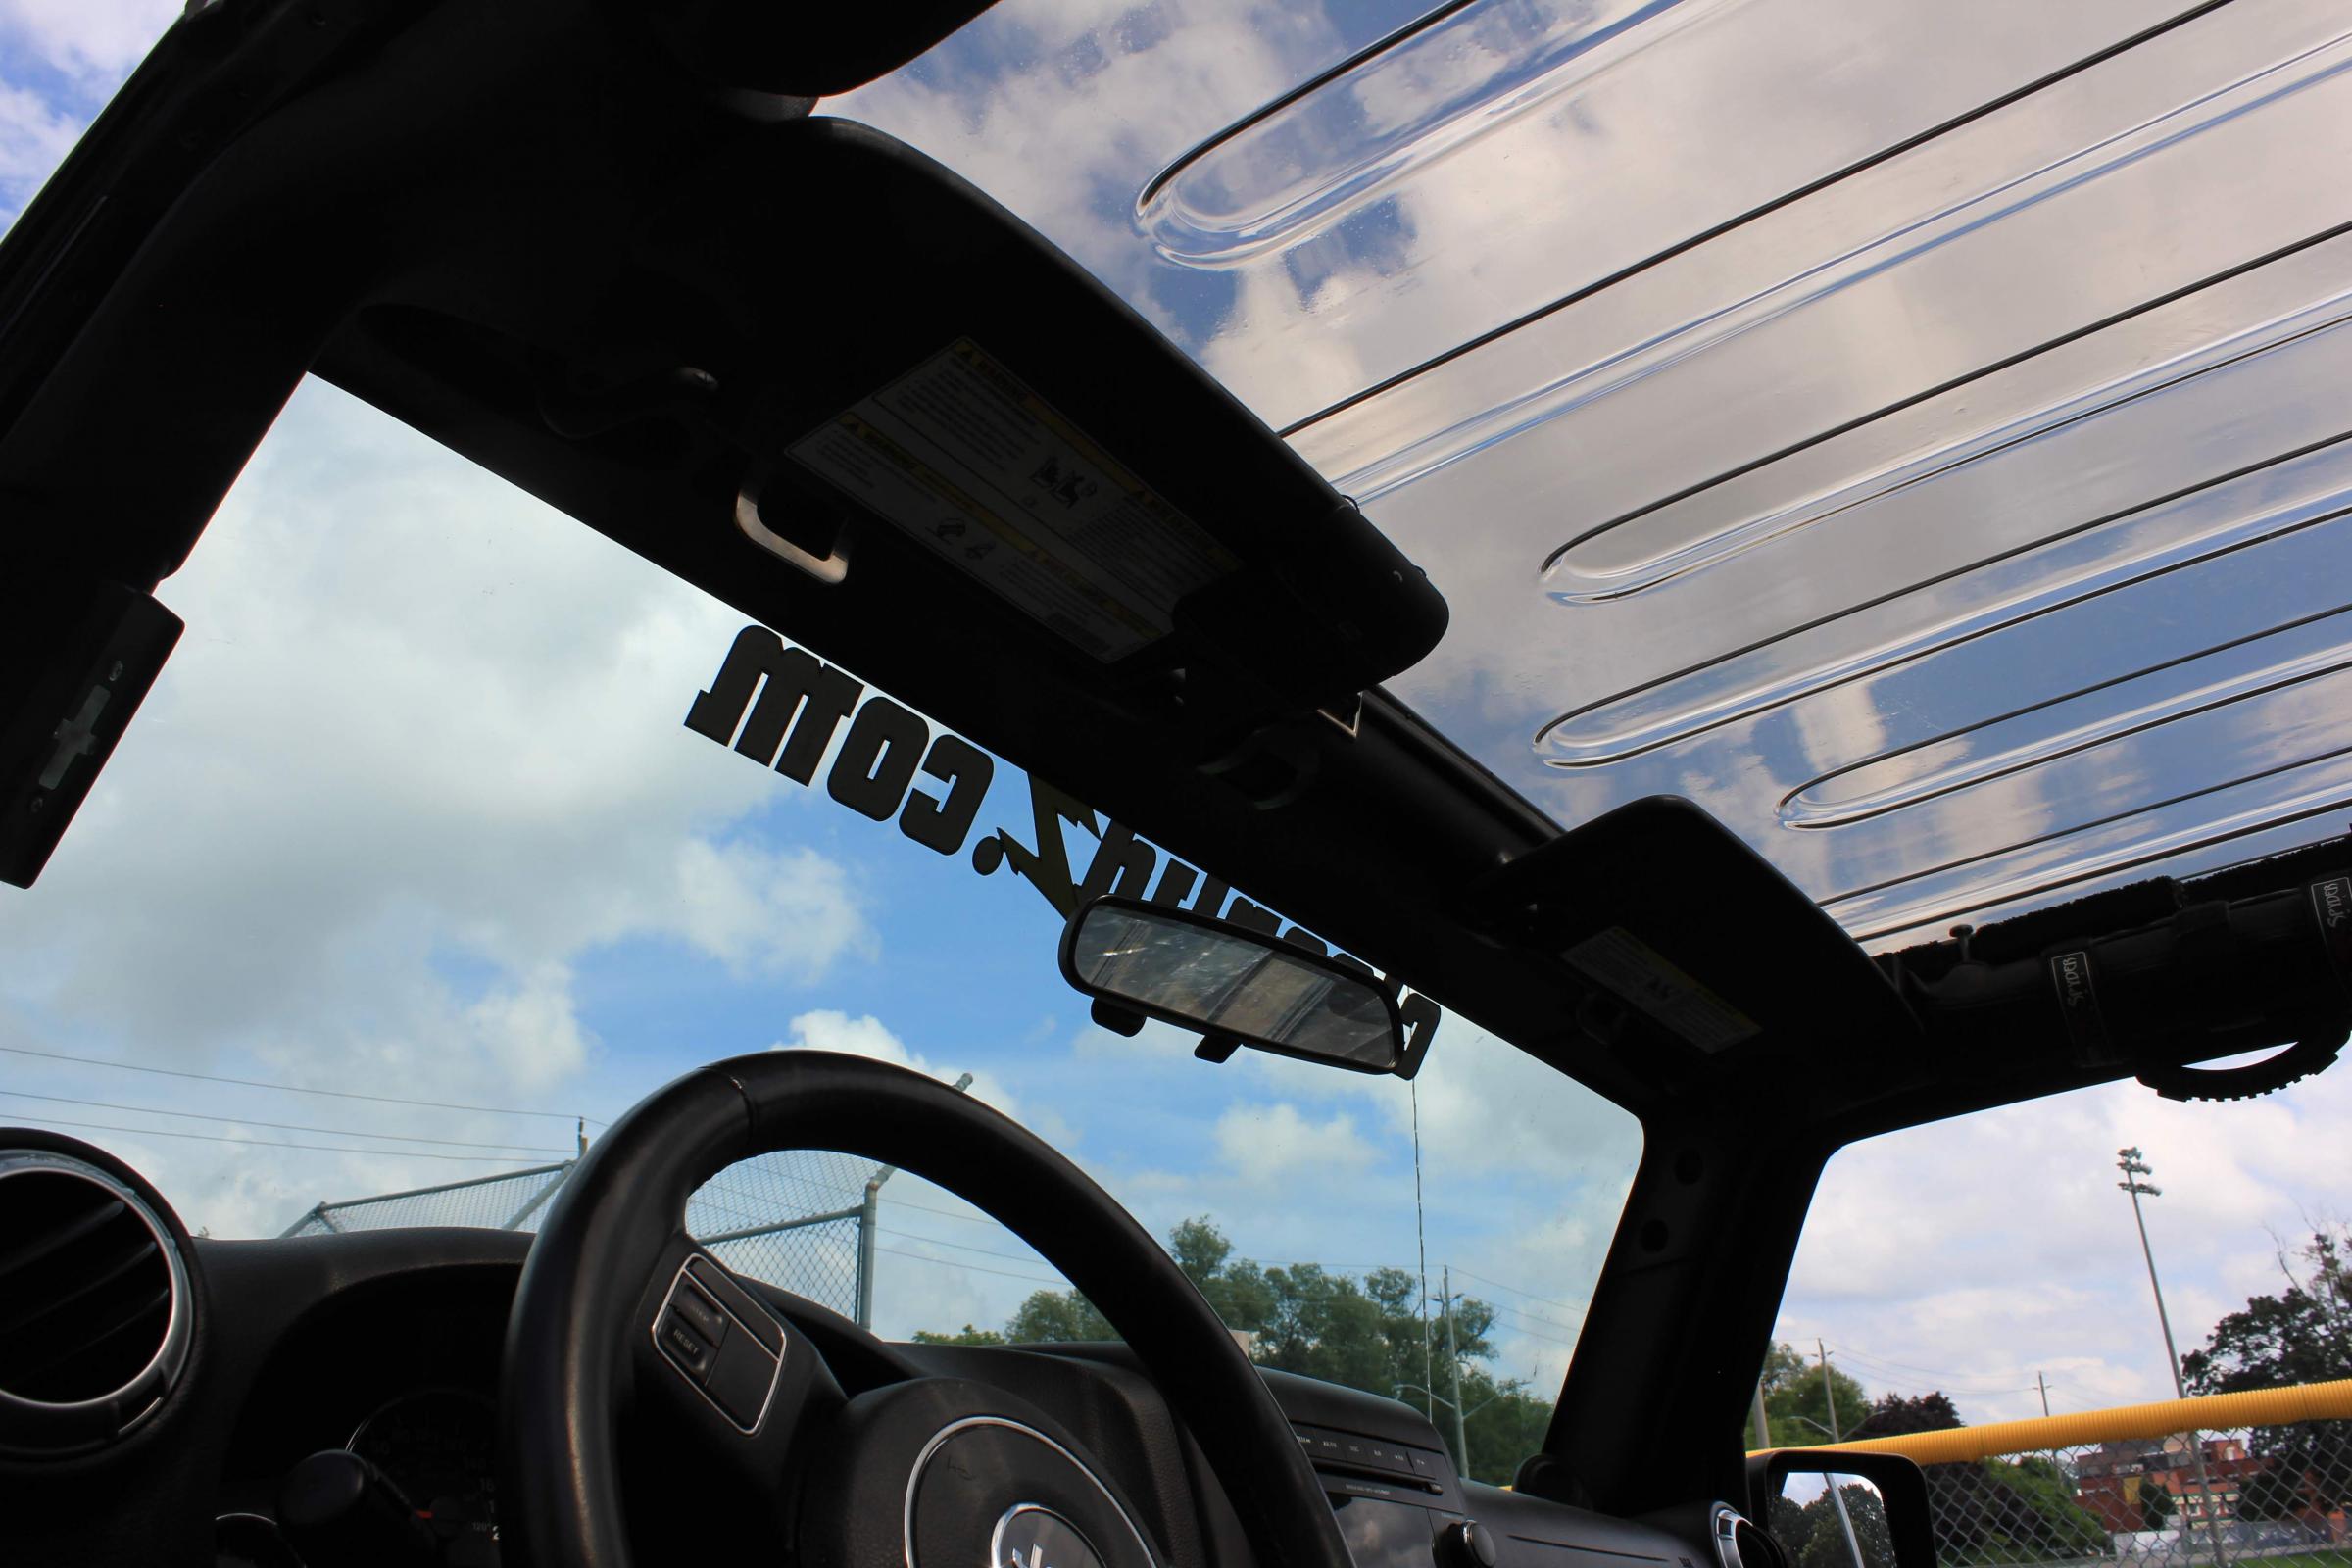  ClearLidz Panoramic Freedom Style Top - 180° Clear Transparent  Panoramic Hardtop - Fits Jeep Wrangler JK 2009-2018 - Clear Sunroof Top  Panel - Tinted UV Resistant Keeps Interior Cool - Made in the USA :  Automotive